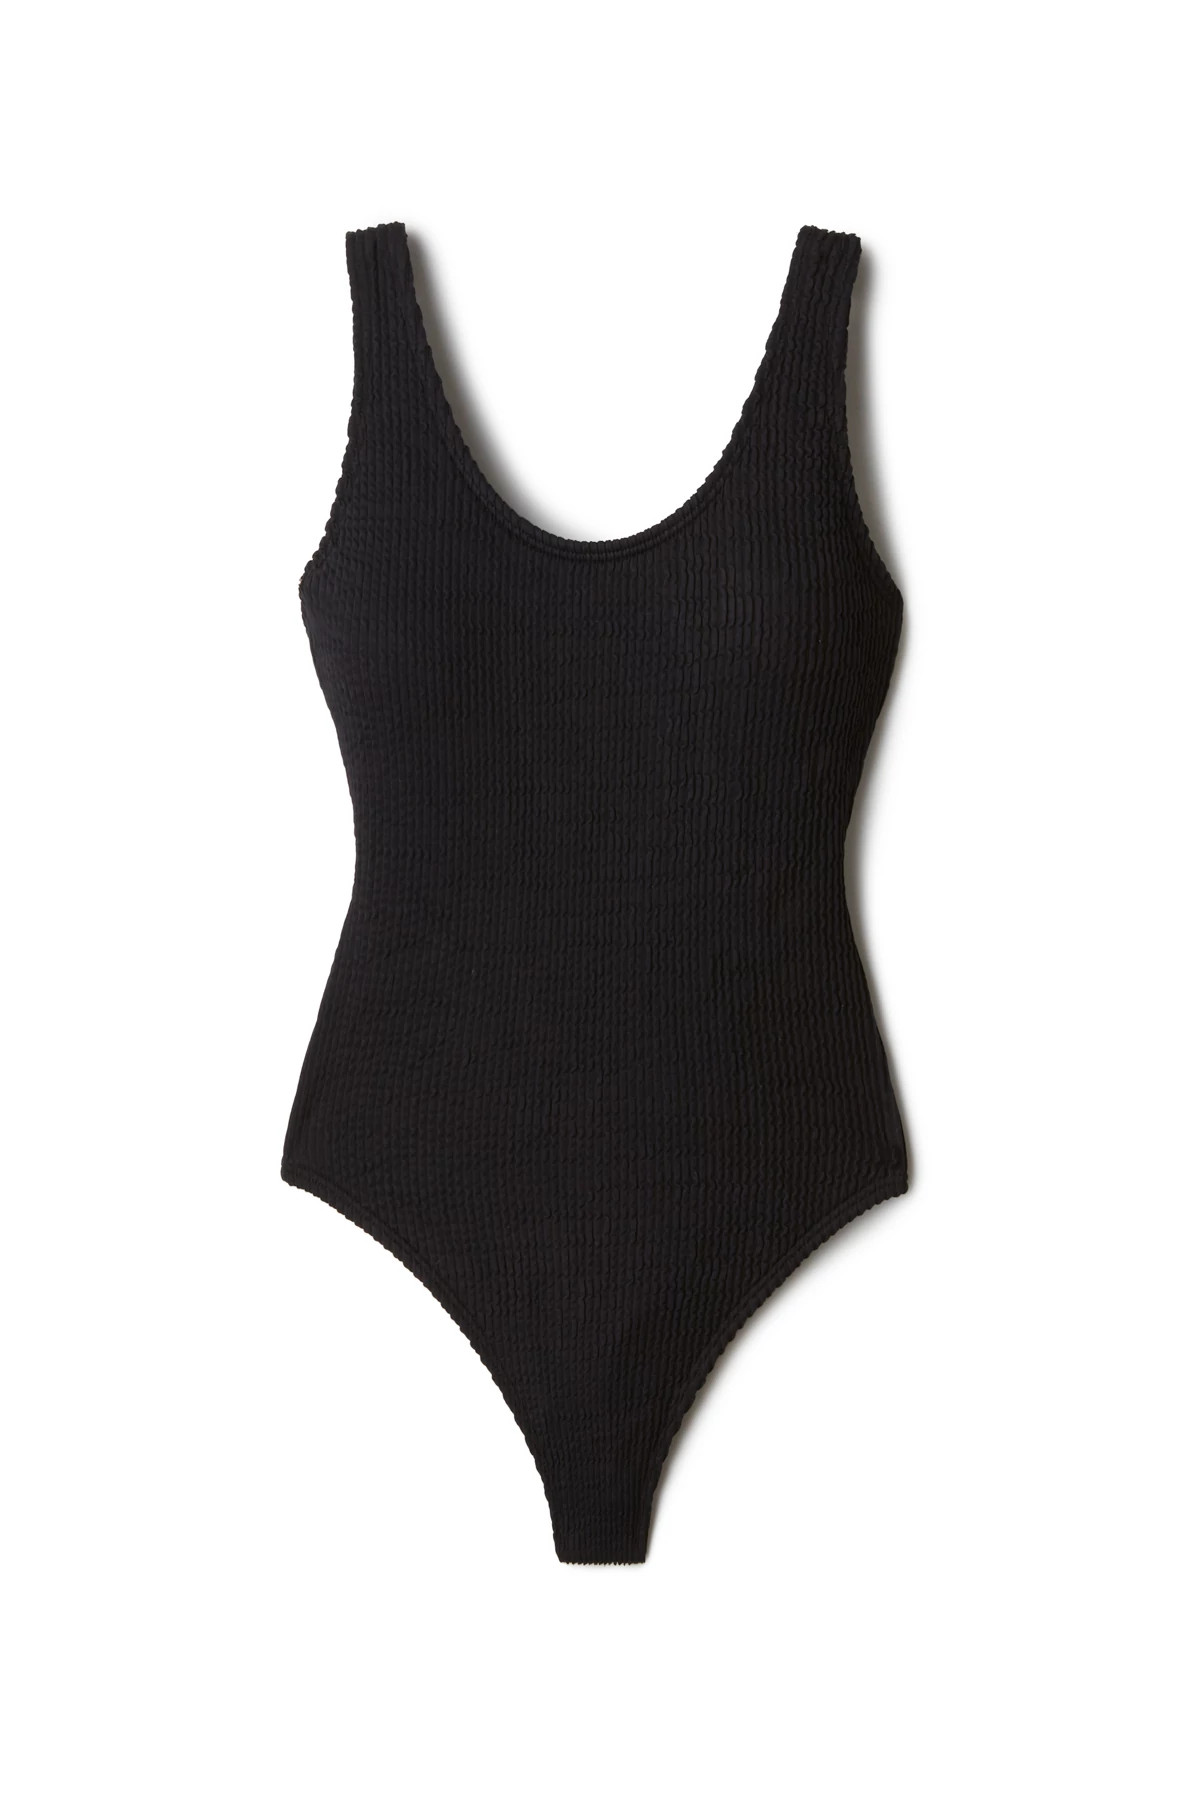 BLACK Ribbed Over The Shoulder One Piece Swimsuit image number 4